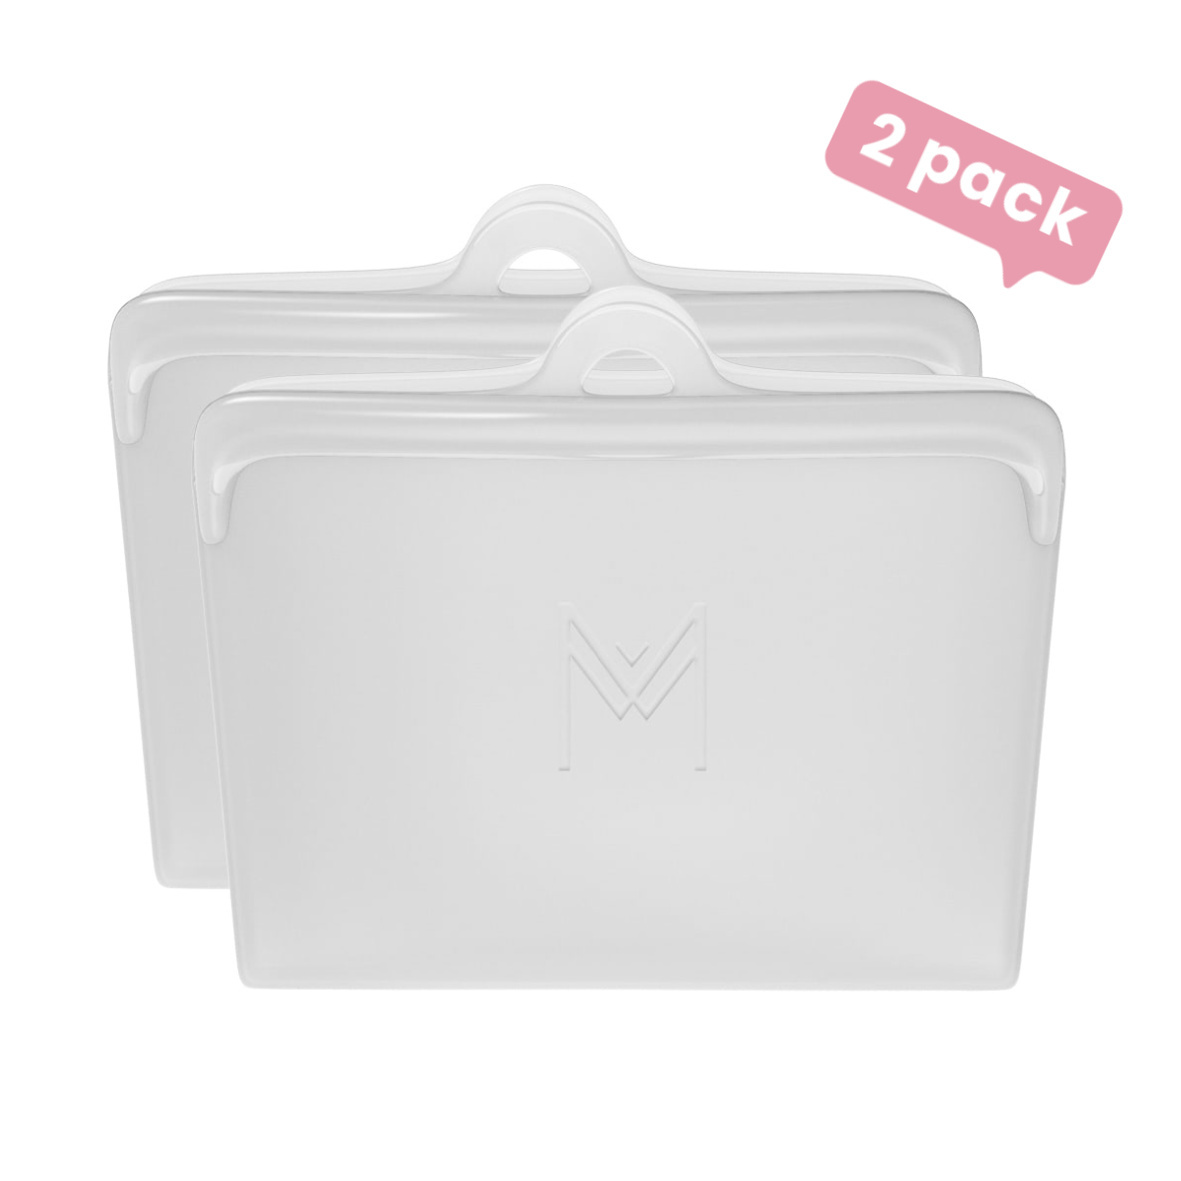 MontiiCo Pack & Snack Bags-1